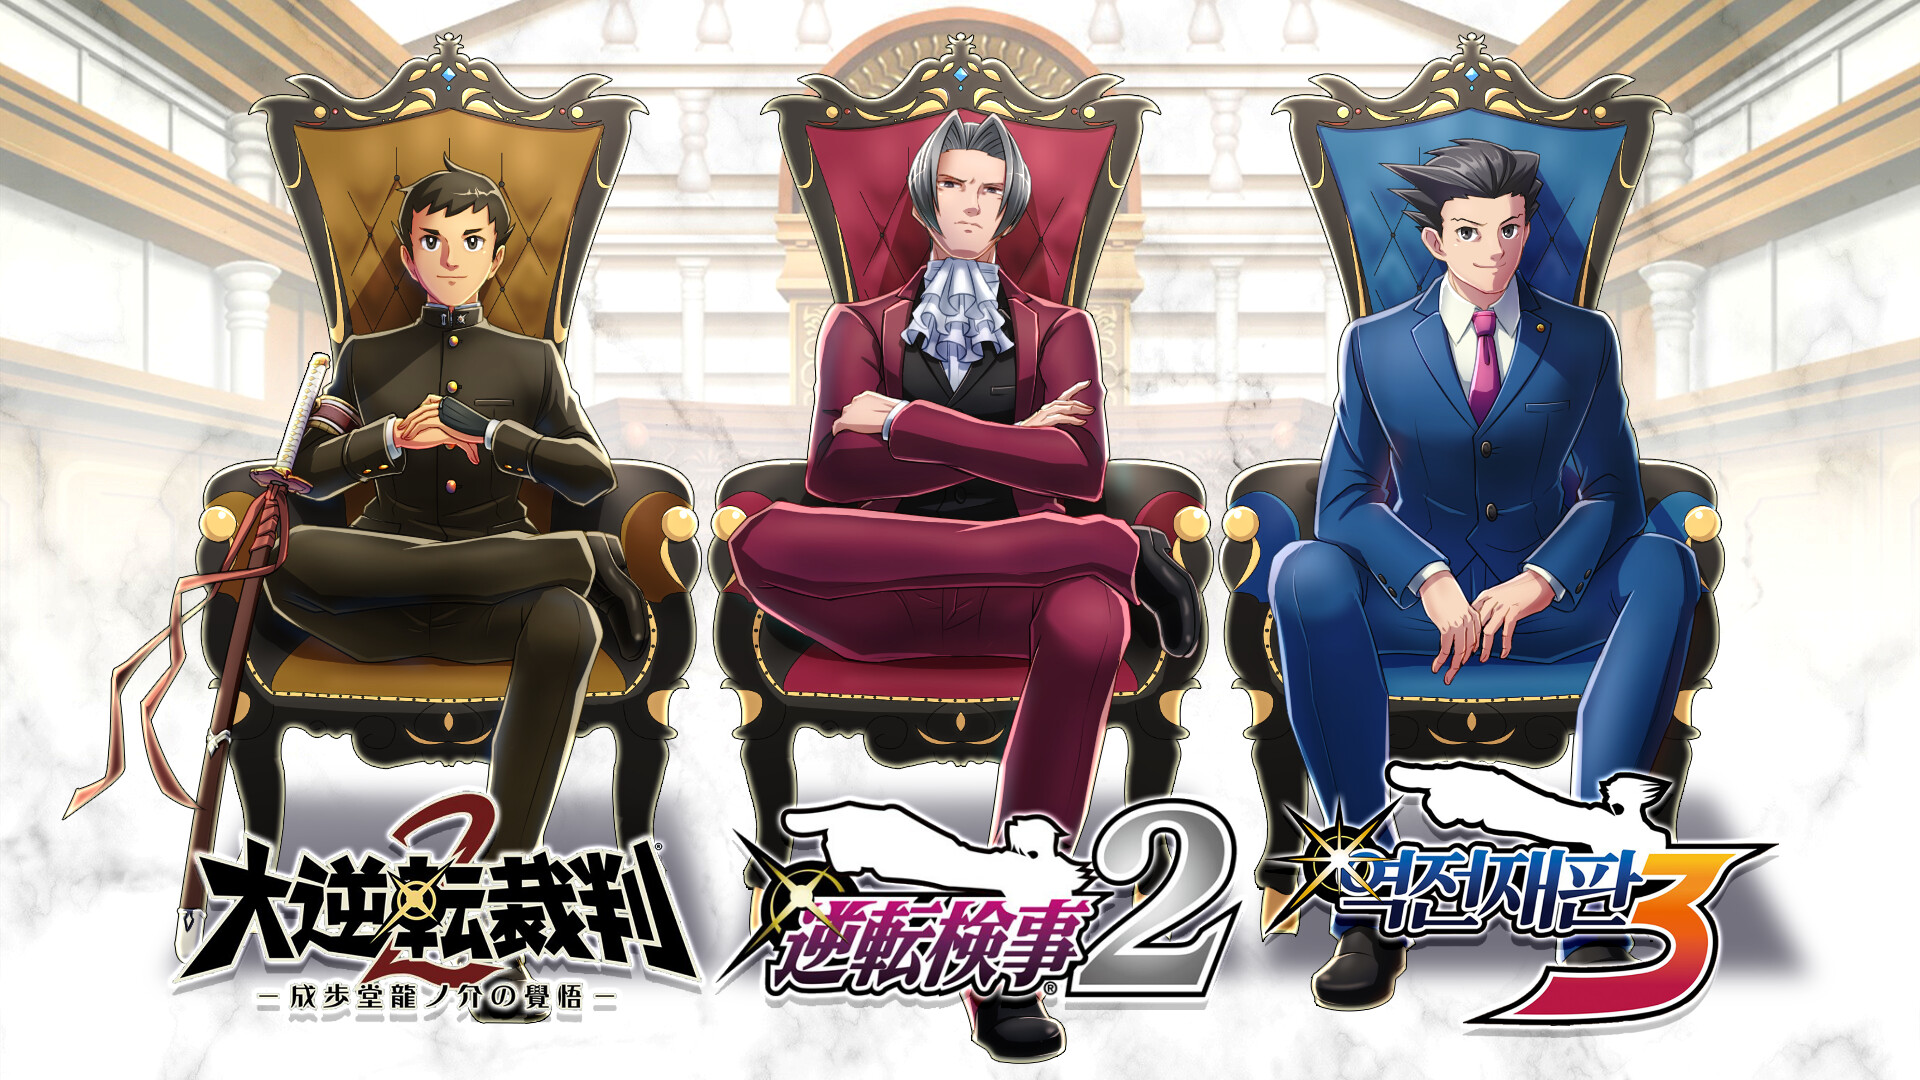 ArtStation - Phoenix Wright: Ace Attorney - Characters for